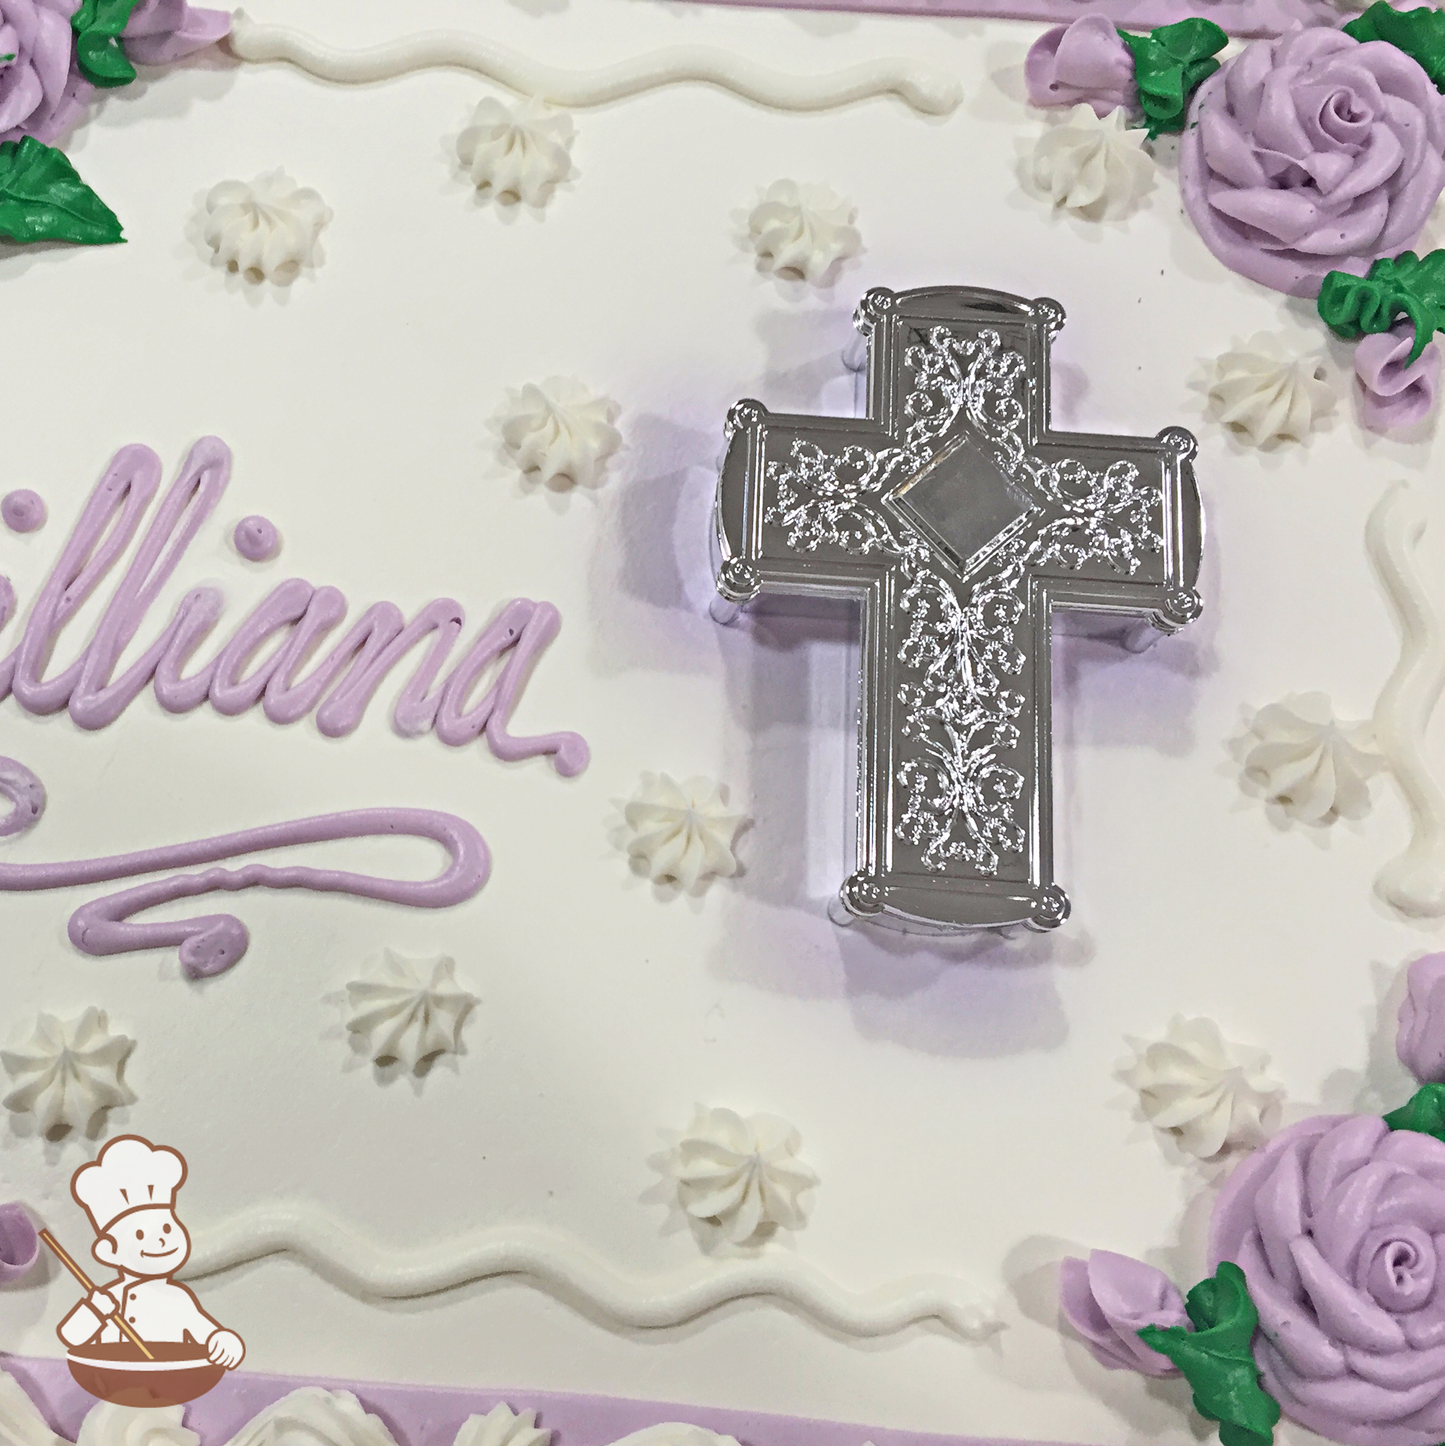 Birthday sheet cake with silver cross toy and buttercream roses.